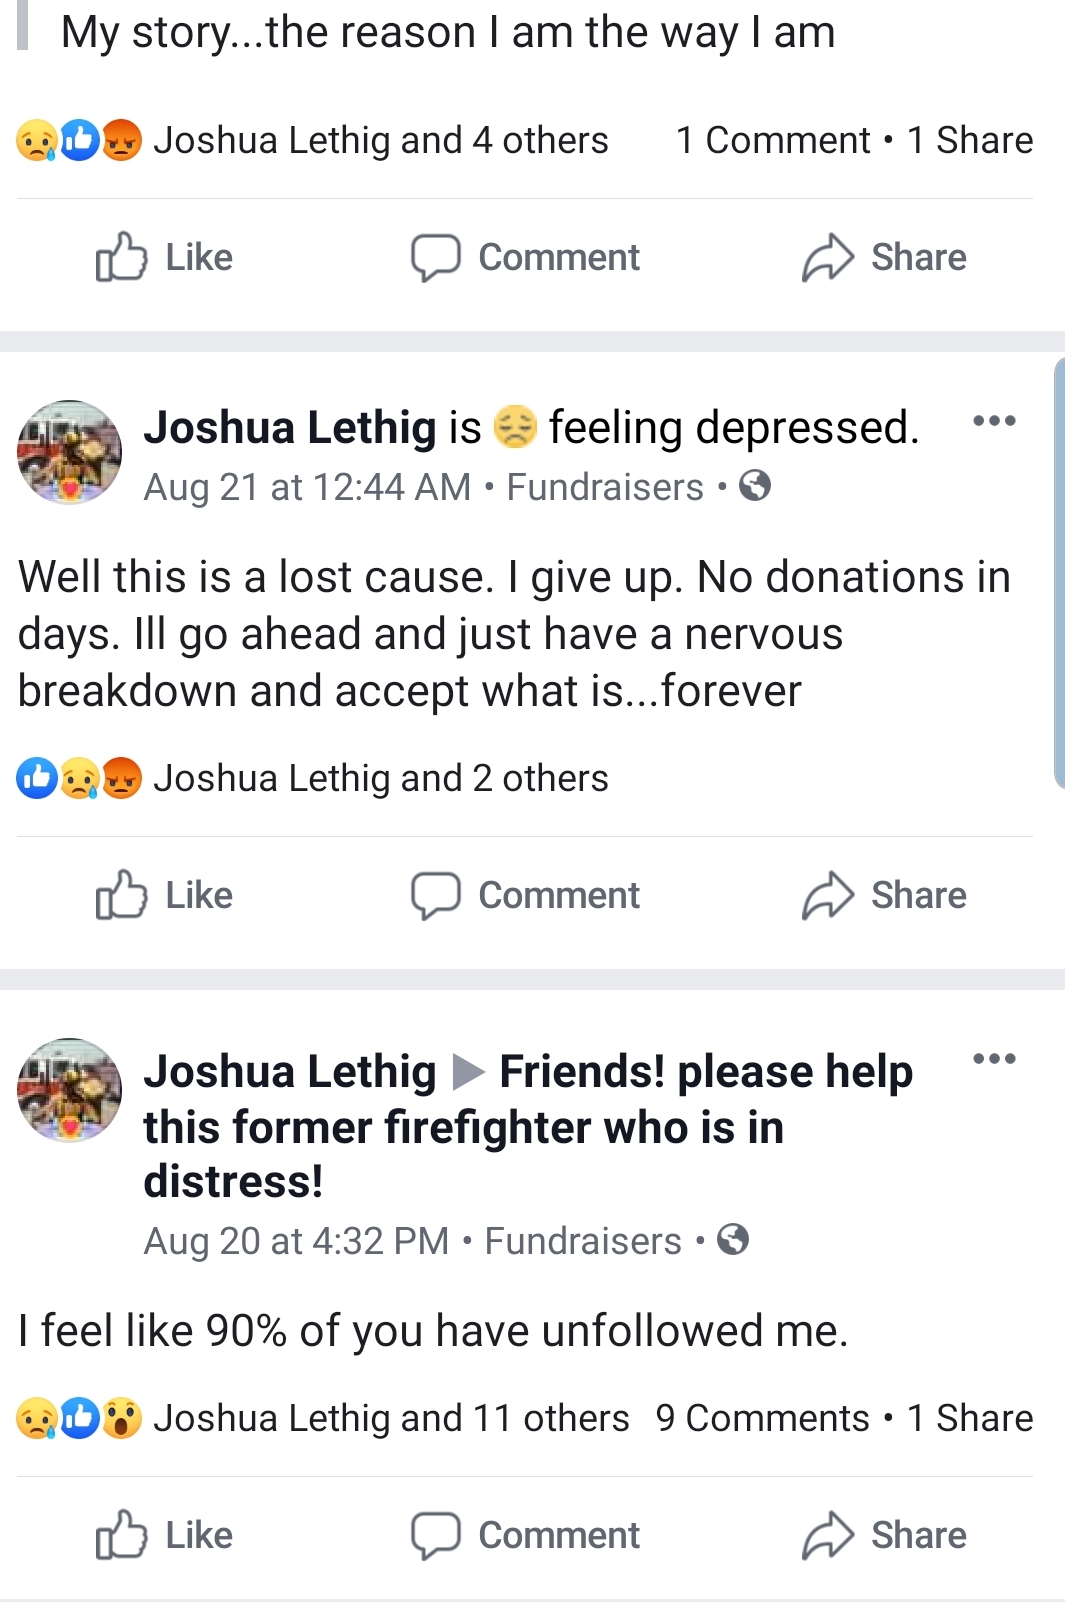 screenshot - My story...the reason I am the way I am Wo Joshua Lethig and 4 others 1 Comment 1 Comment Joshua Lethig is feeling depressed. Aug 21 at Fundraisers. Well this is a lost cause. I give up. No donations in days. Ill go ahead and just have a nerv